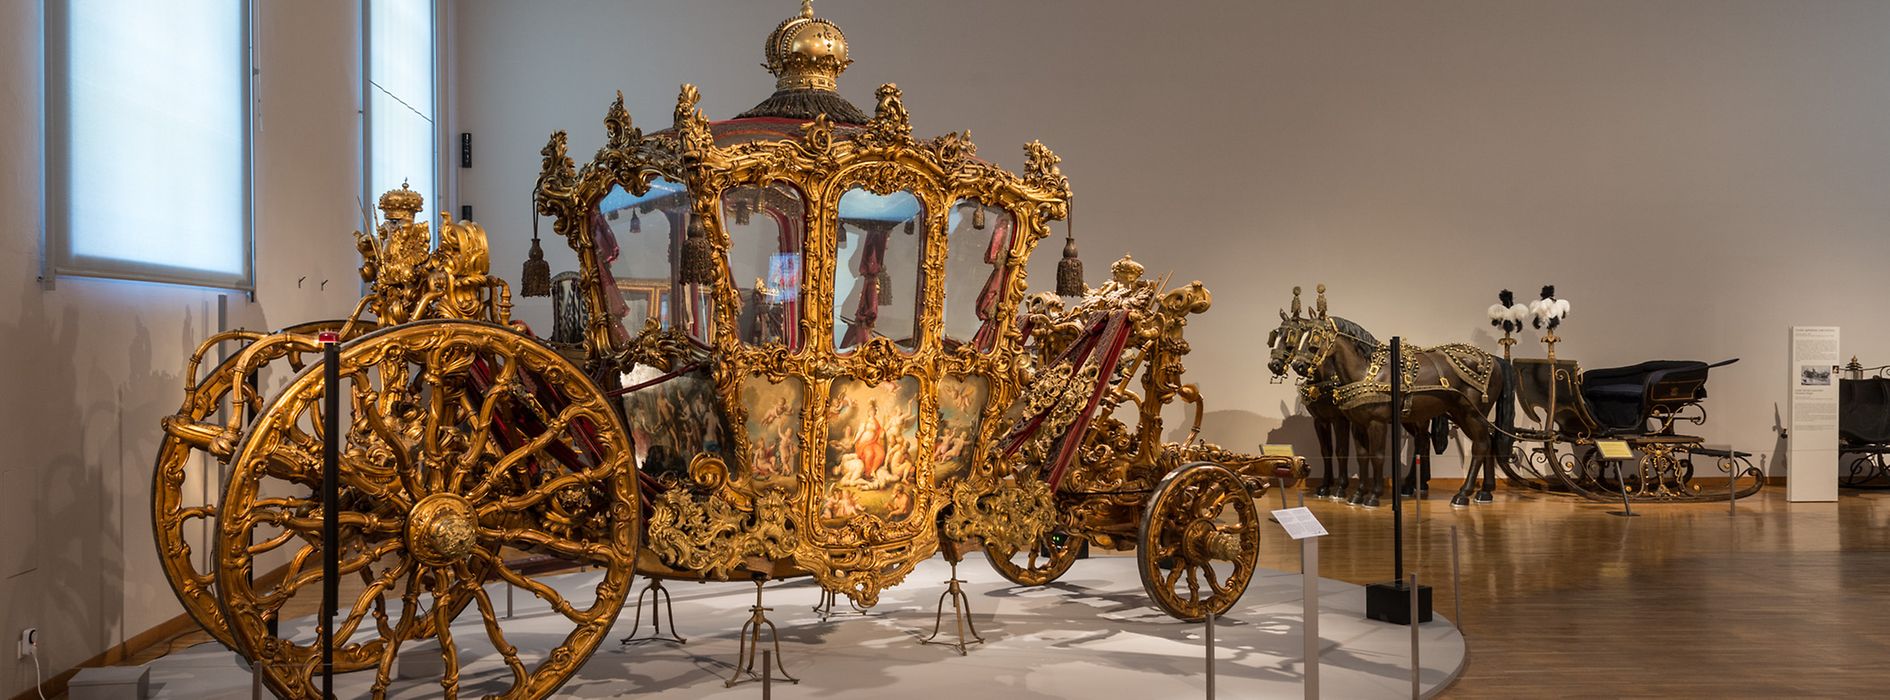 Golden imperial carriage